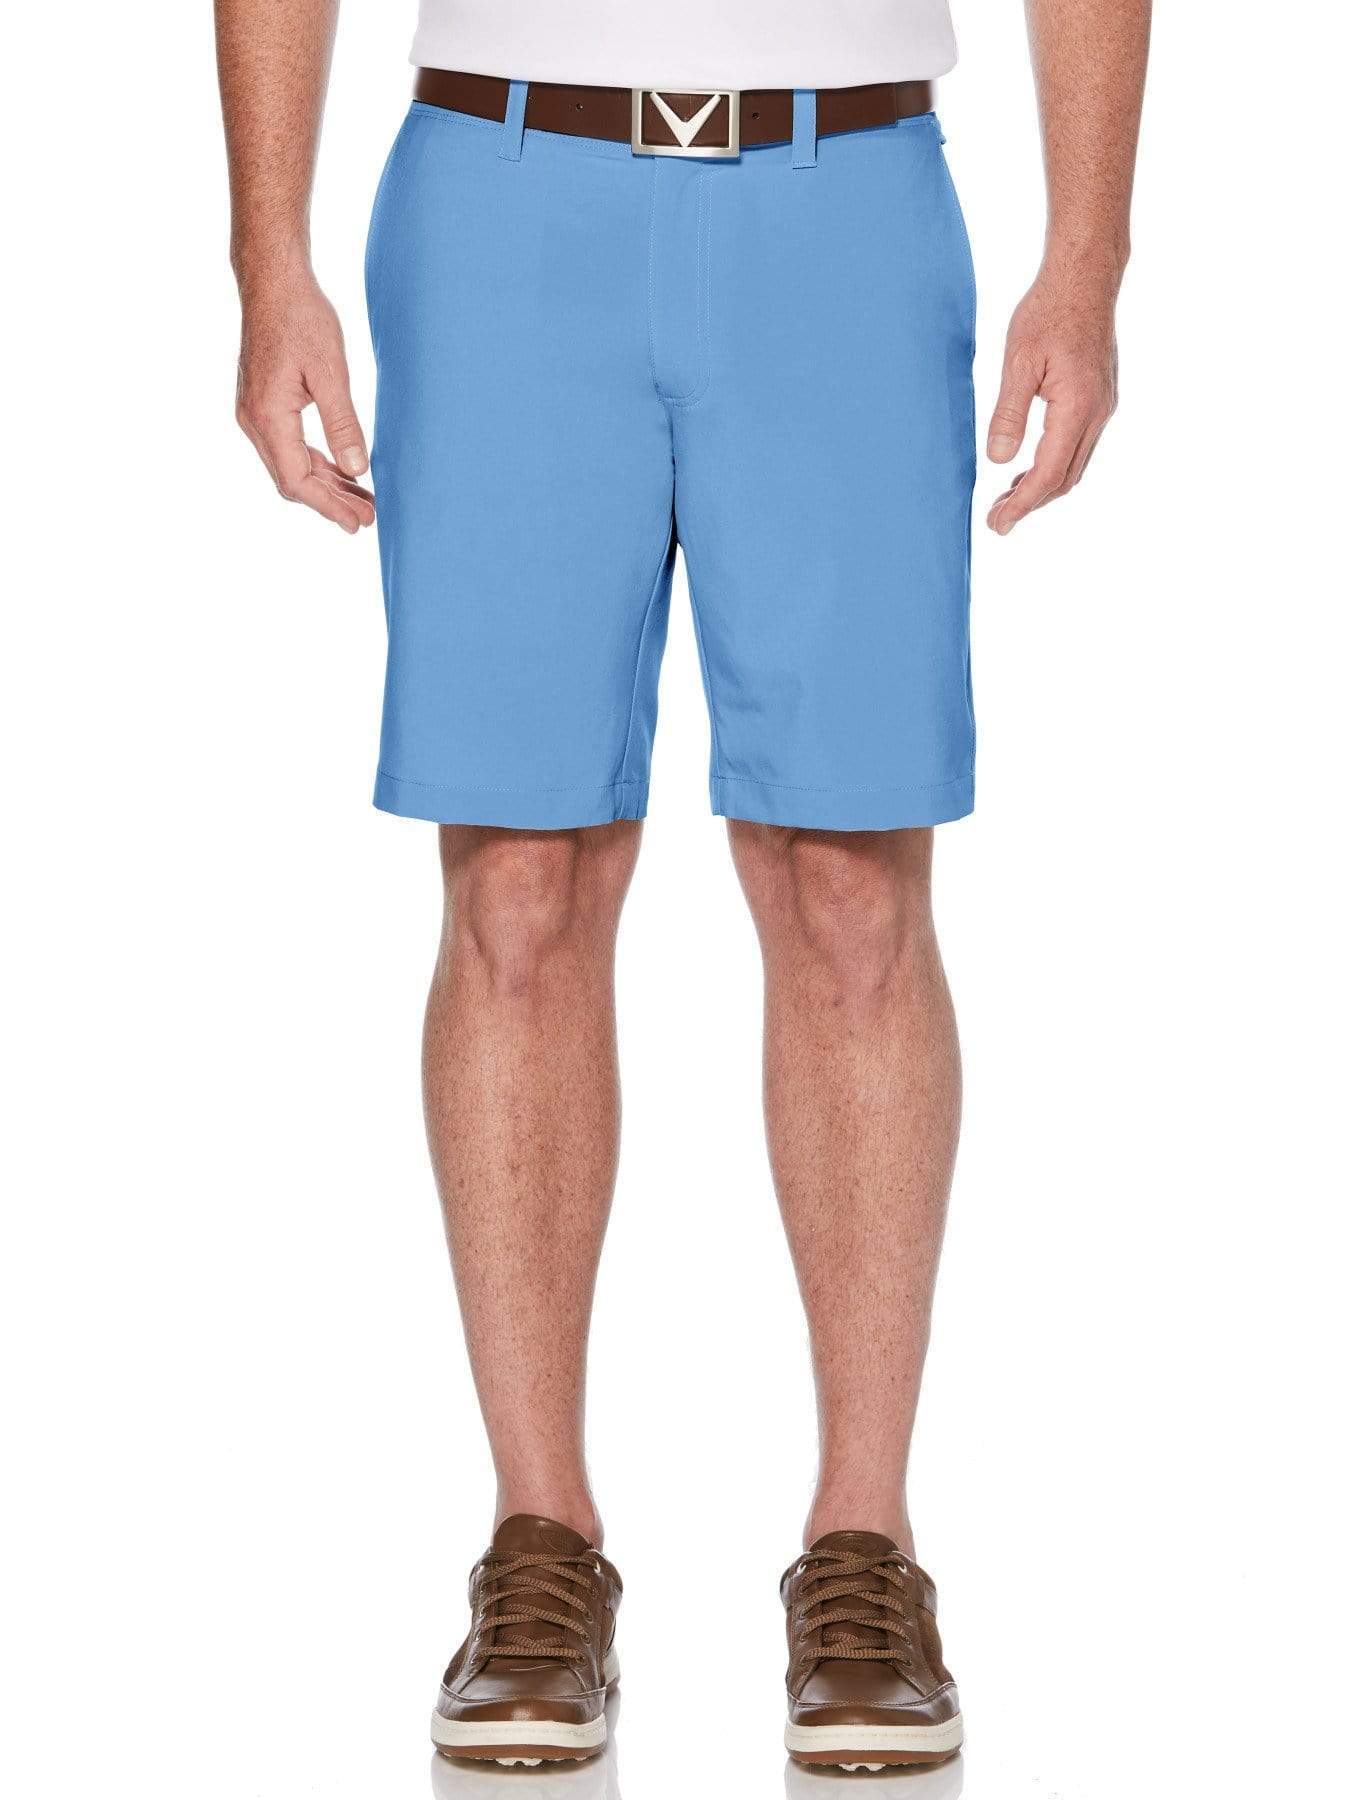 $24.99 Golf Shorts During Callaway's Extra 30% Off Sale - Tons of Sizes ...